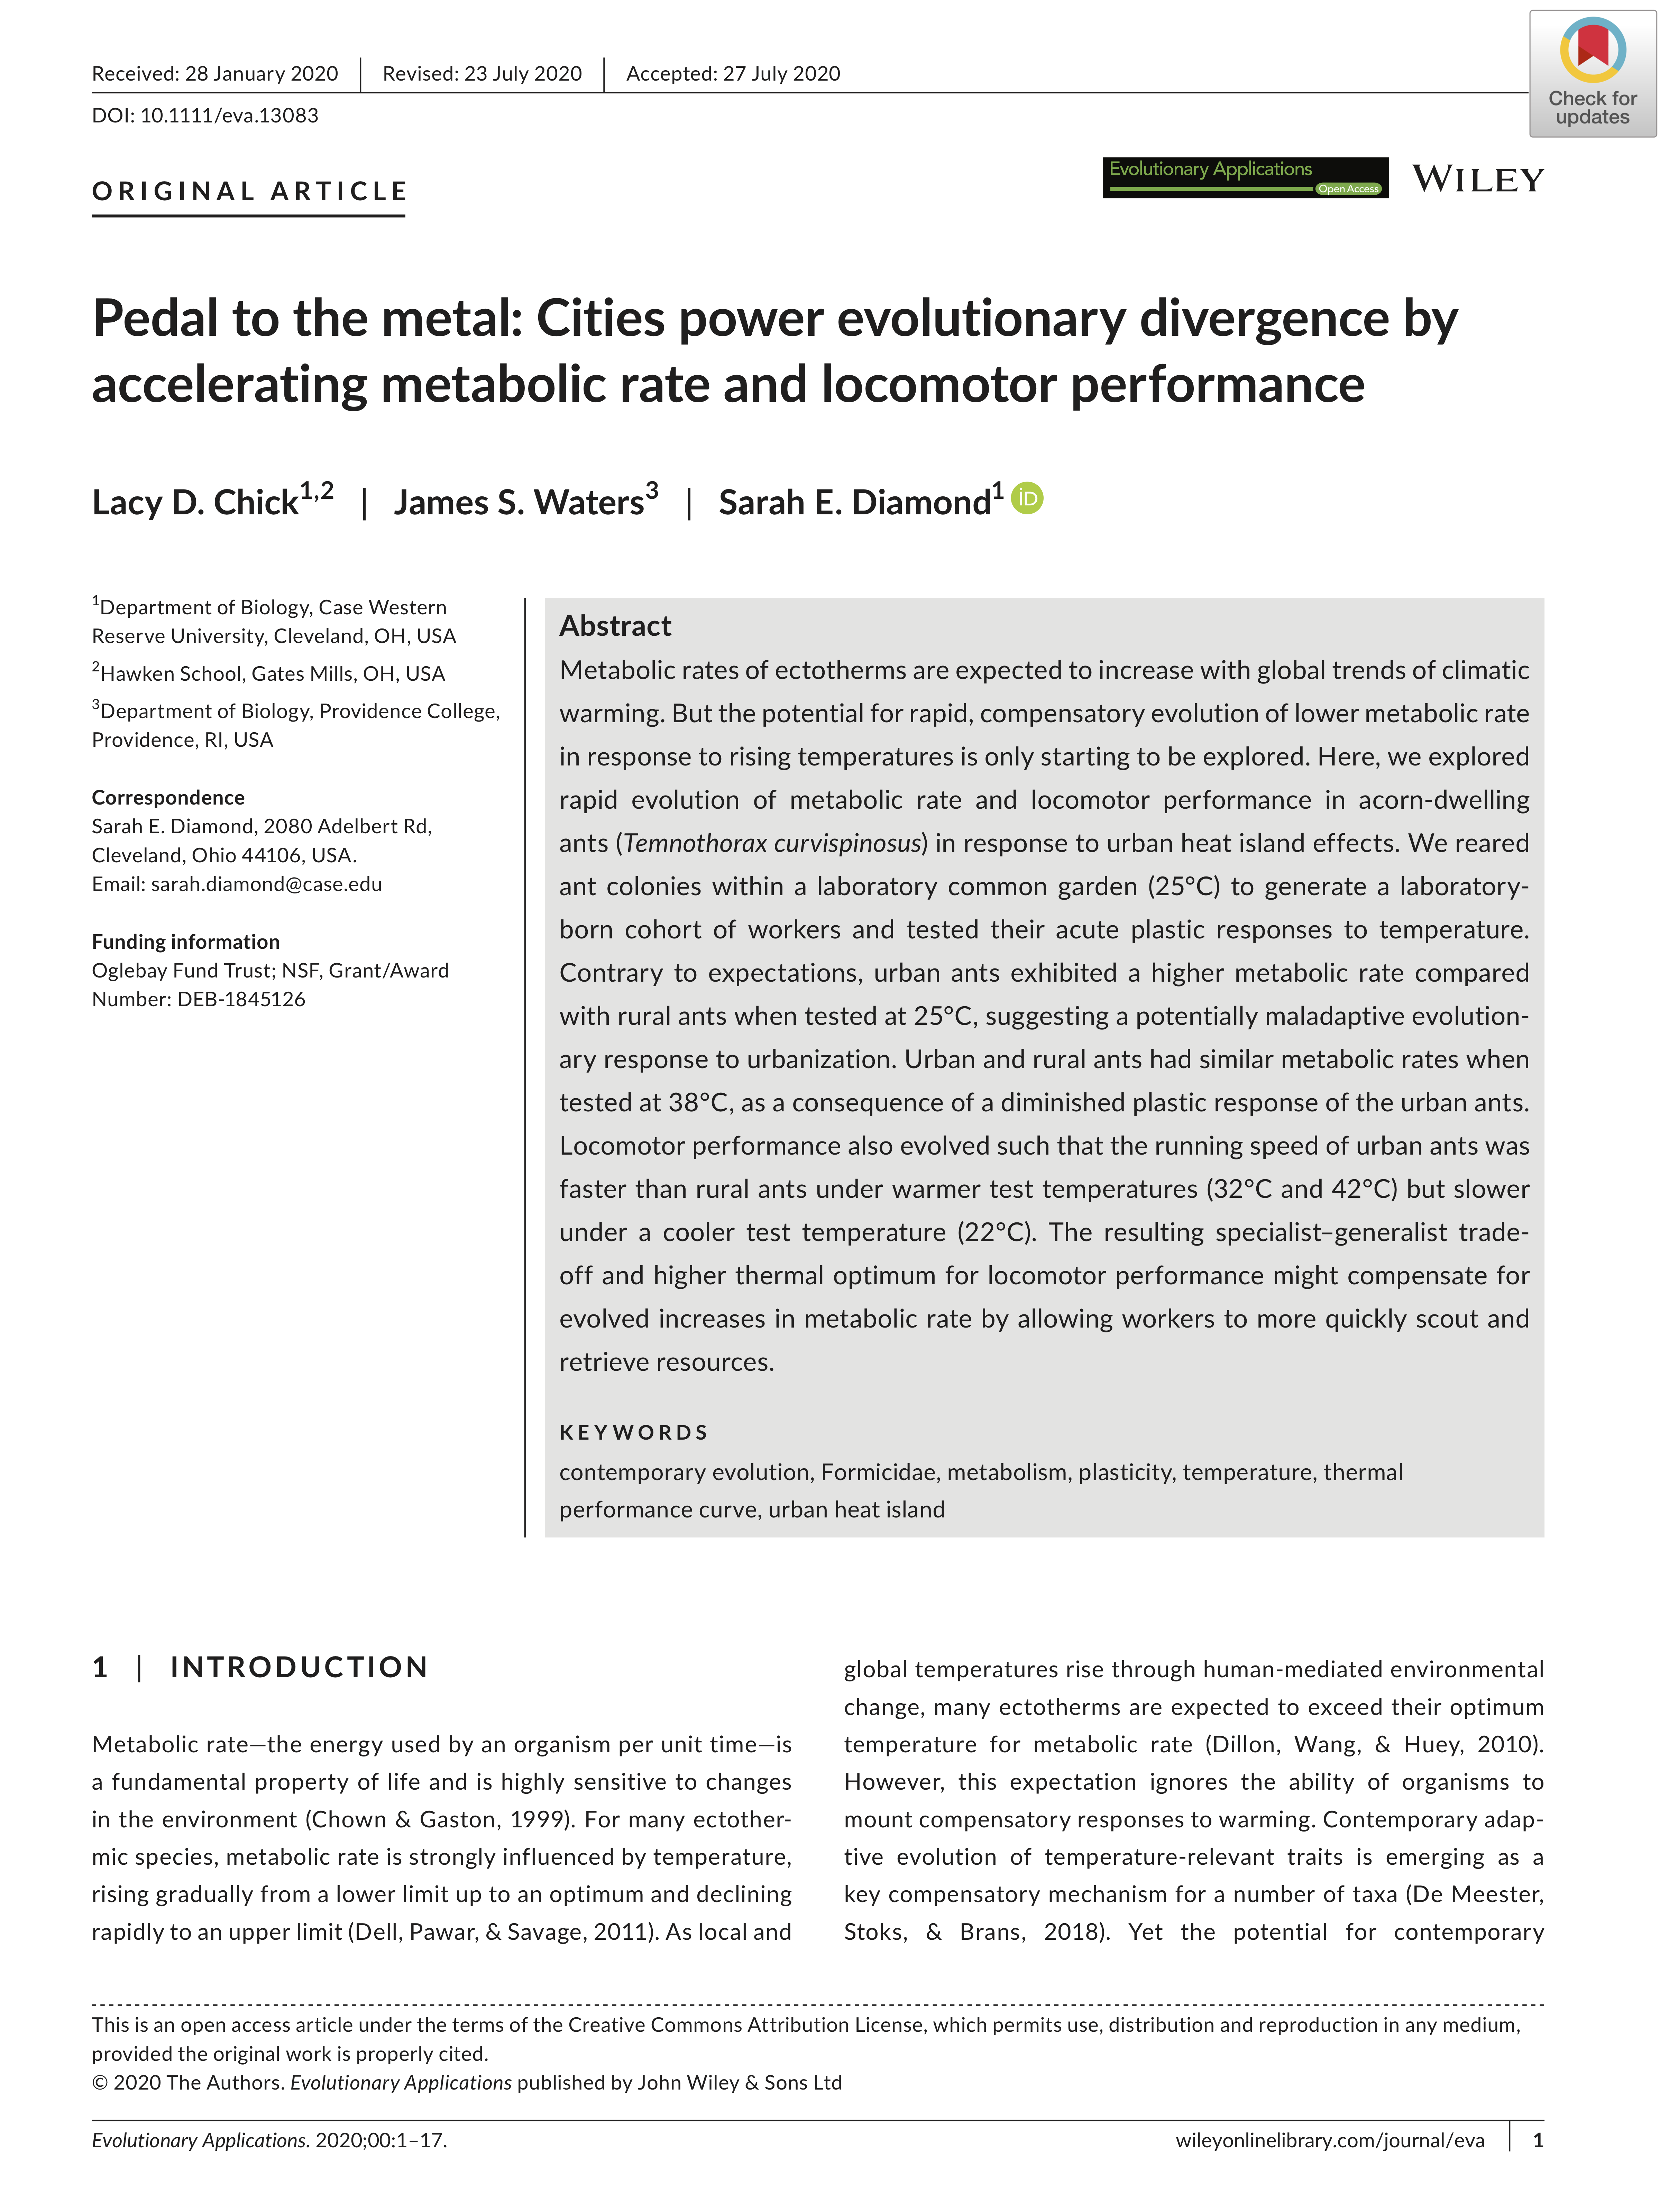 Petal to the Metal: Cities power evolutionary divergence